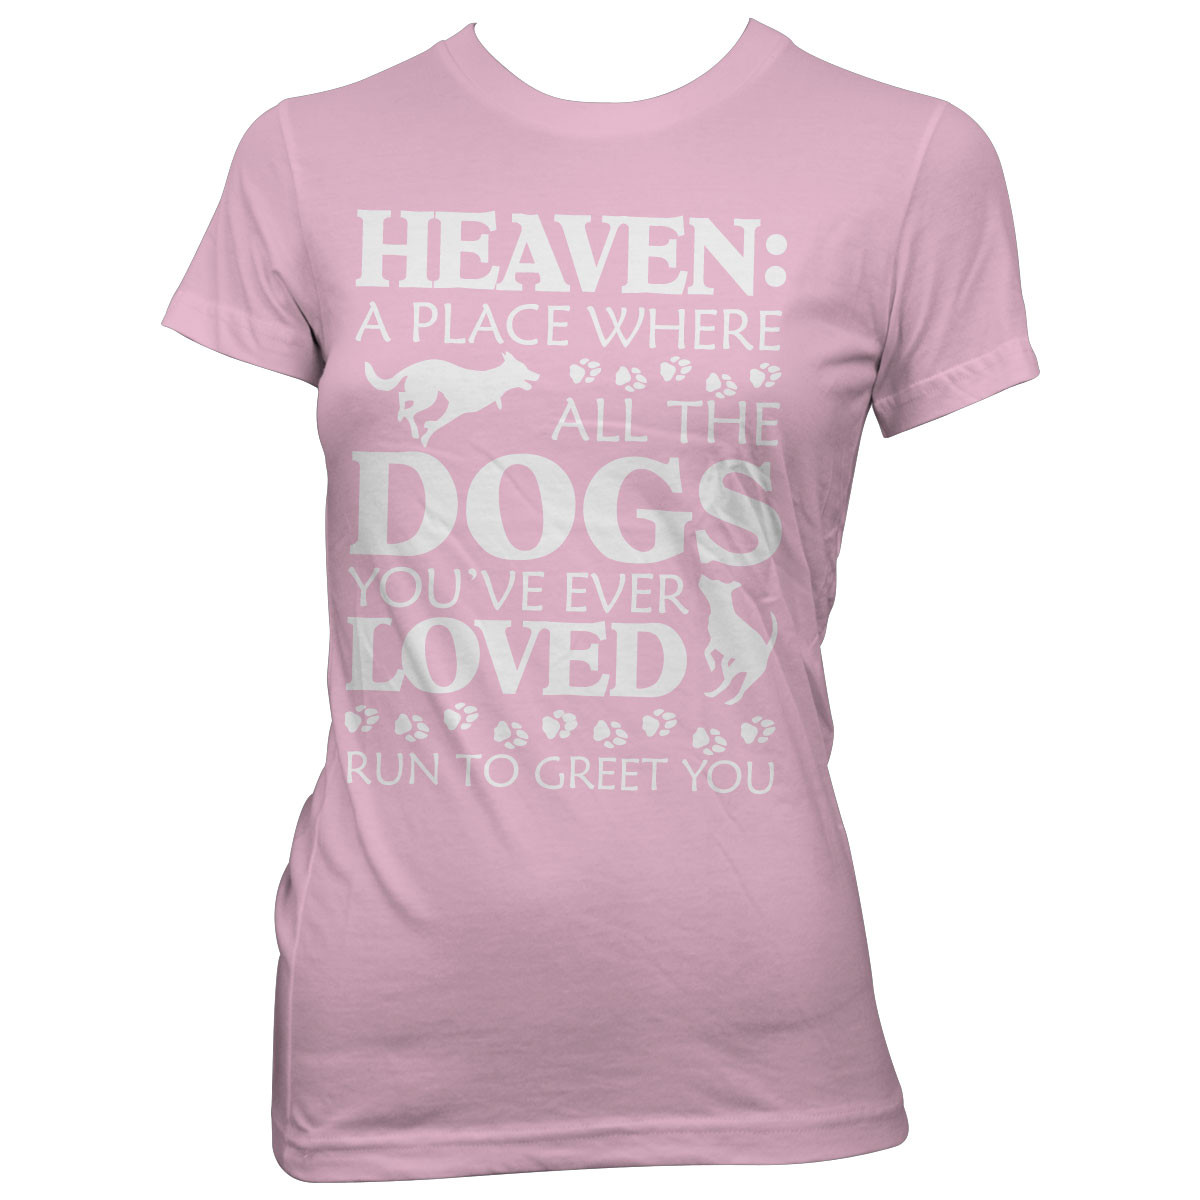 "Heaven: A Place Where Dogs Run To Greet You" T-Shirt